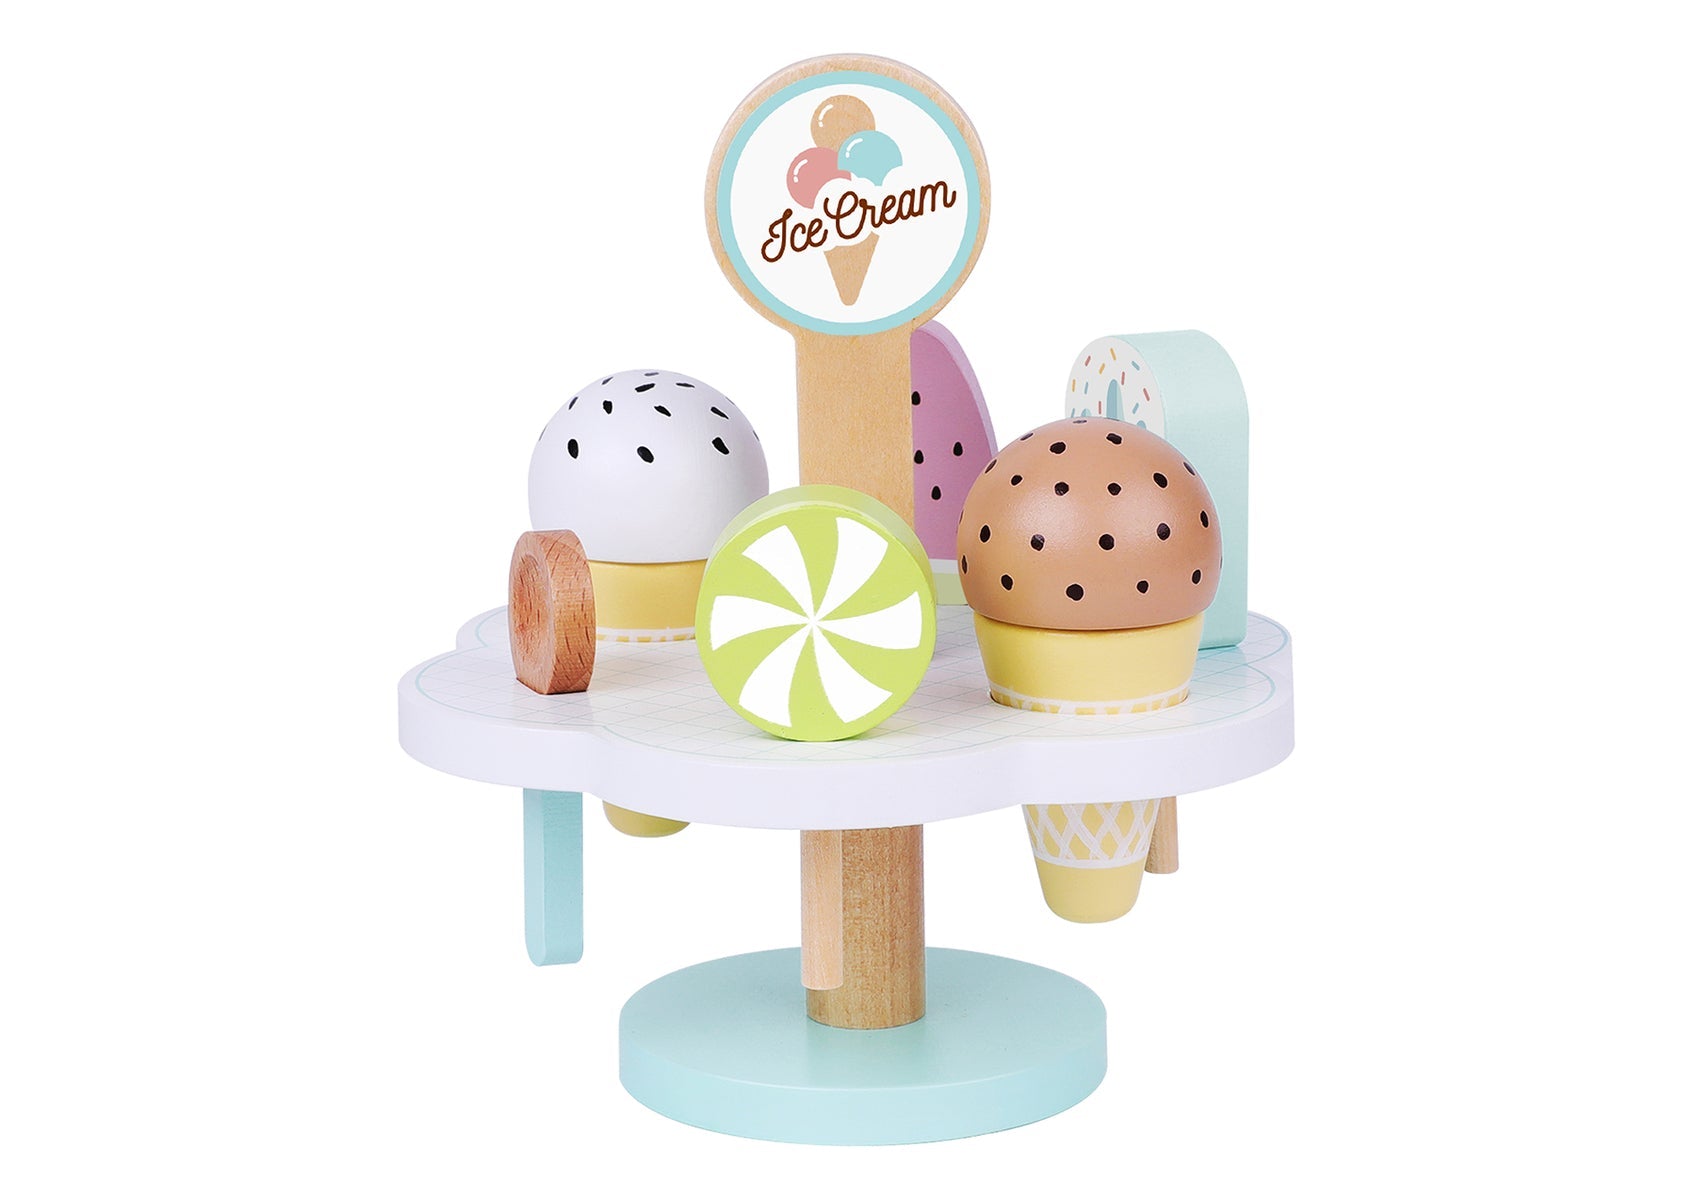 Tooky Toy wooden ice cream set with cones, scoops, and toppings for endless playtime and imaginative fun!